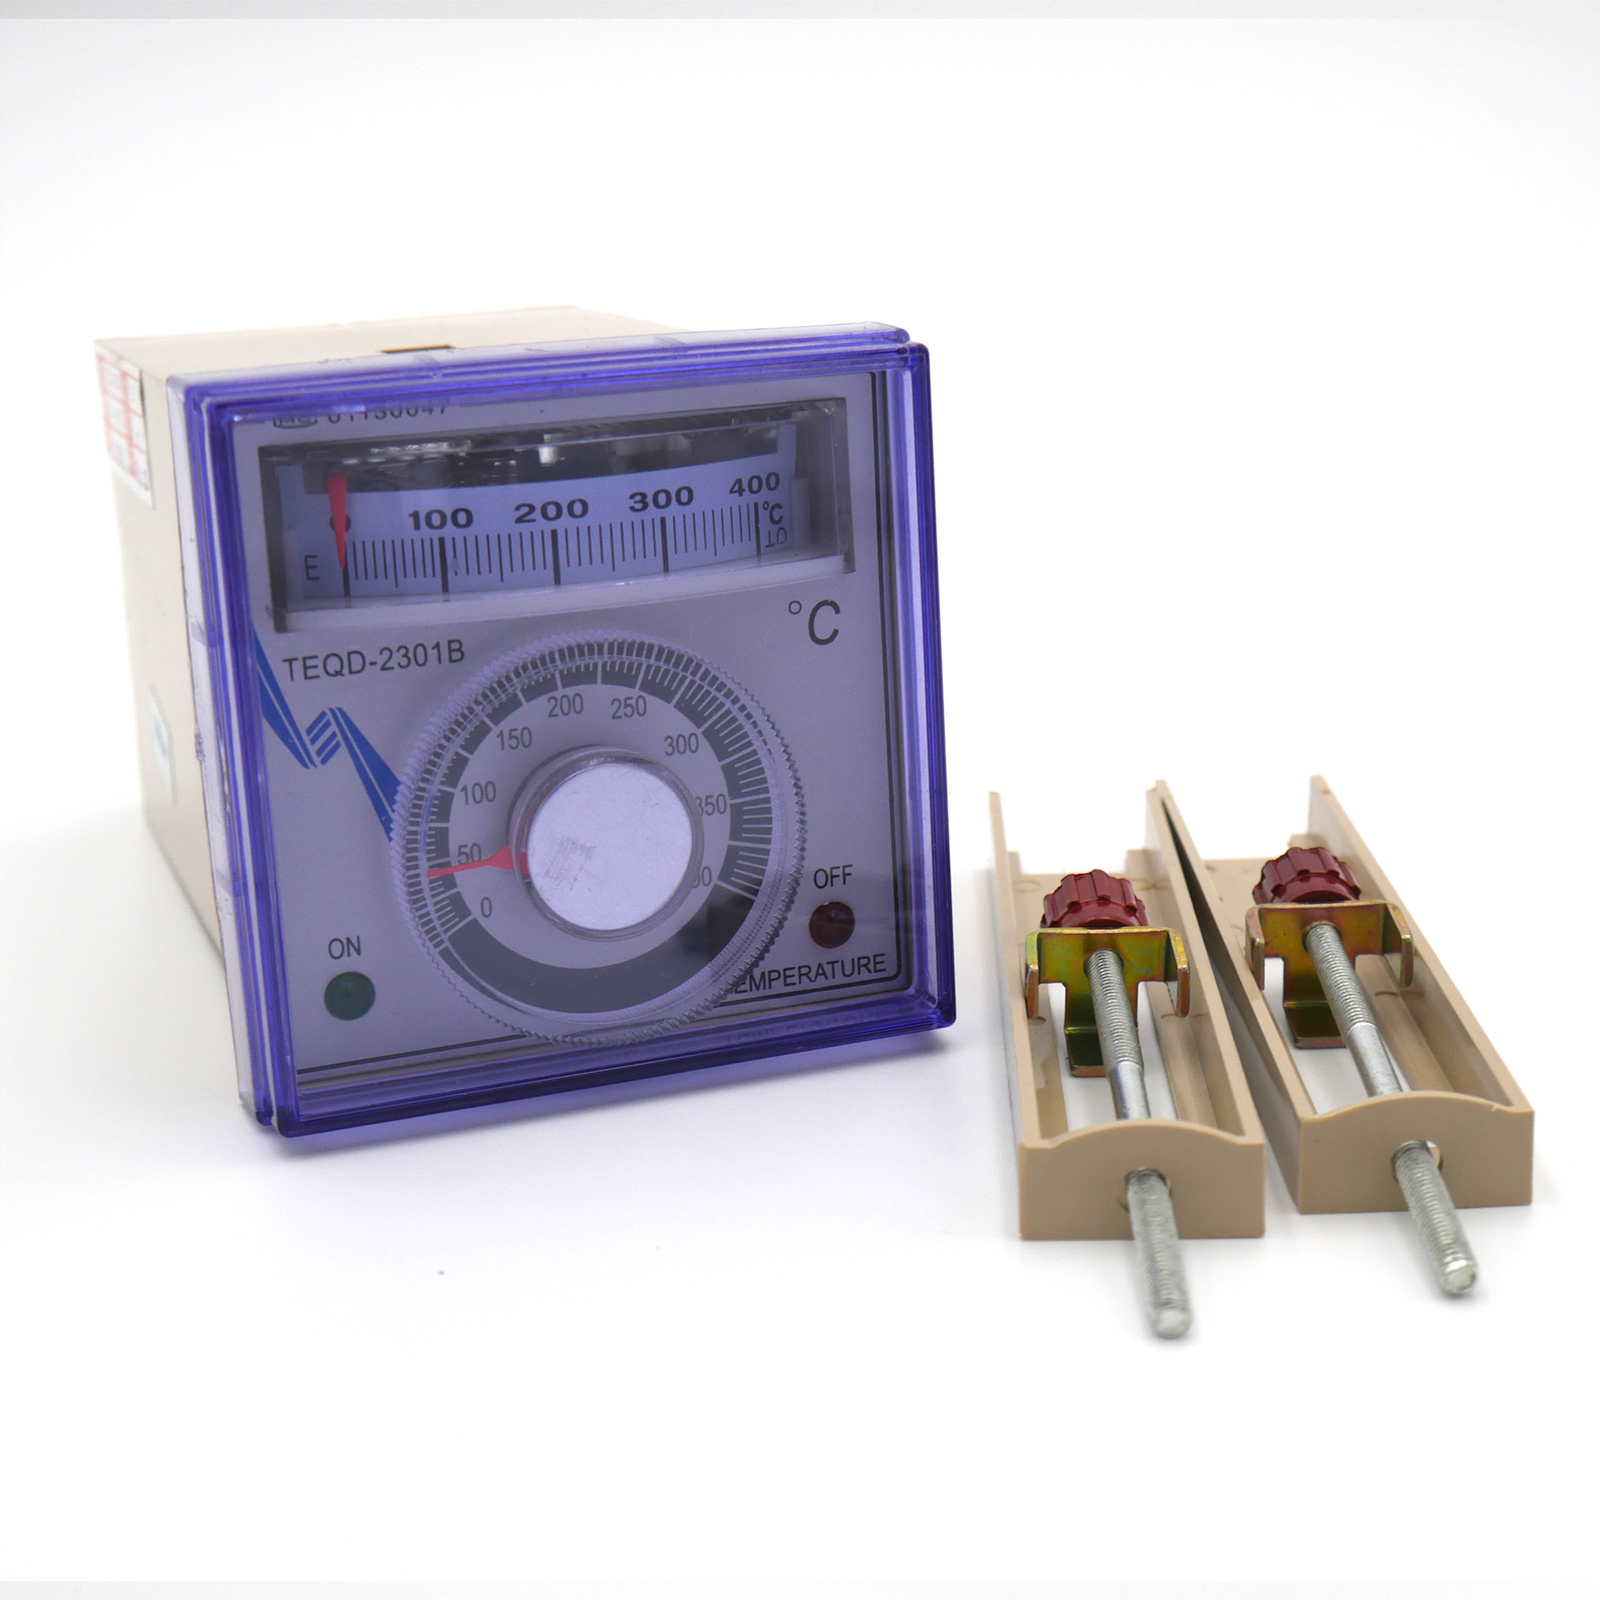 Analog Temperature Controller-TEQD-2301B-110V for Continuous Band Sealer machines. 